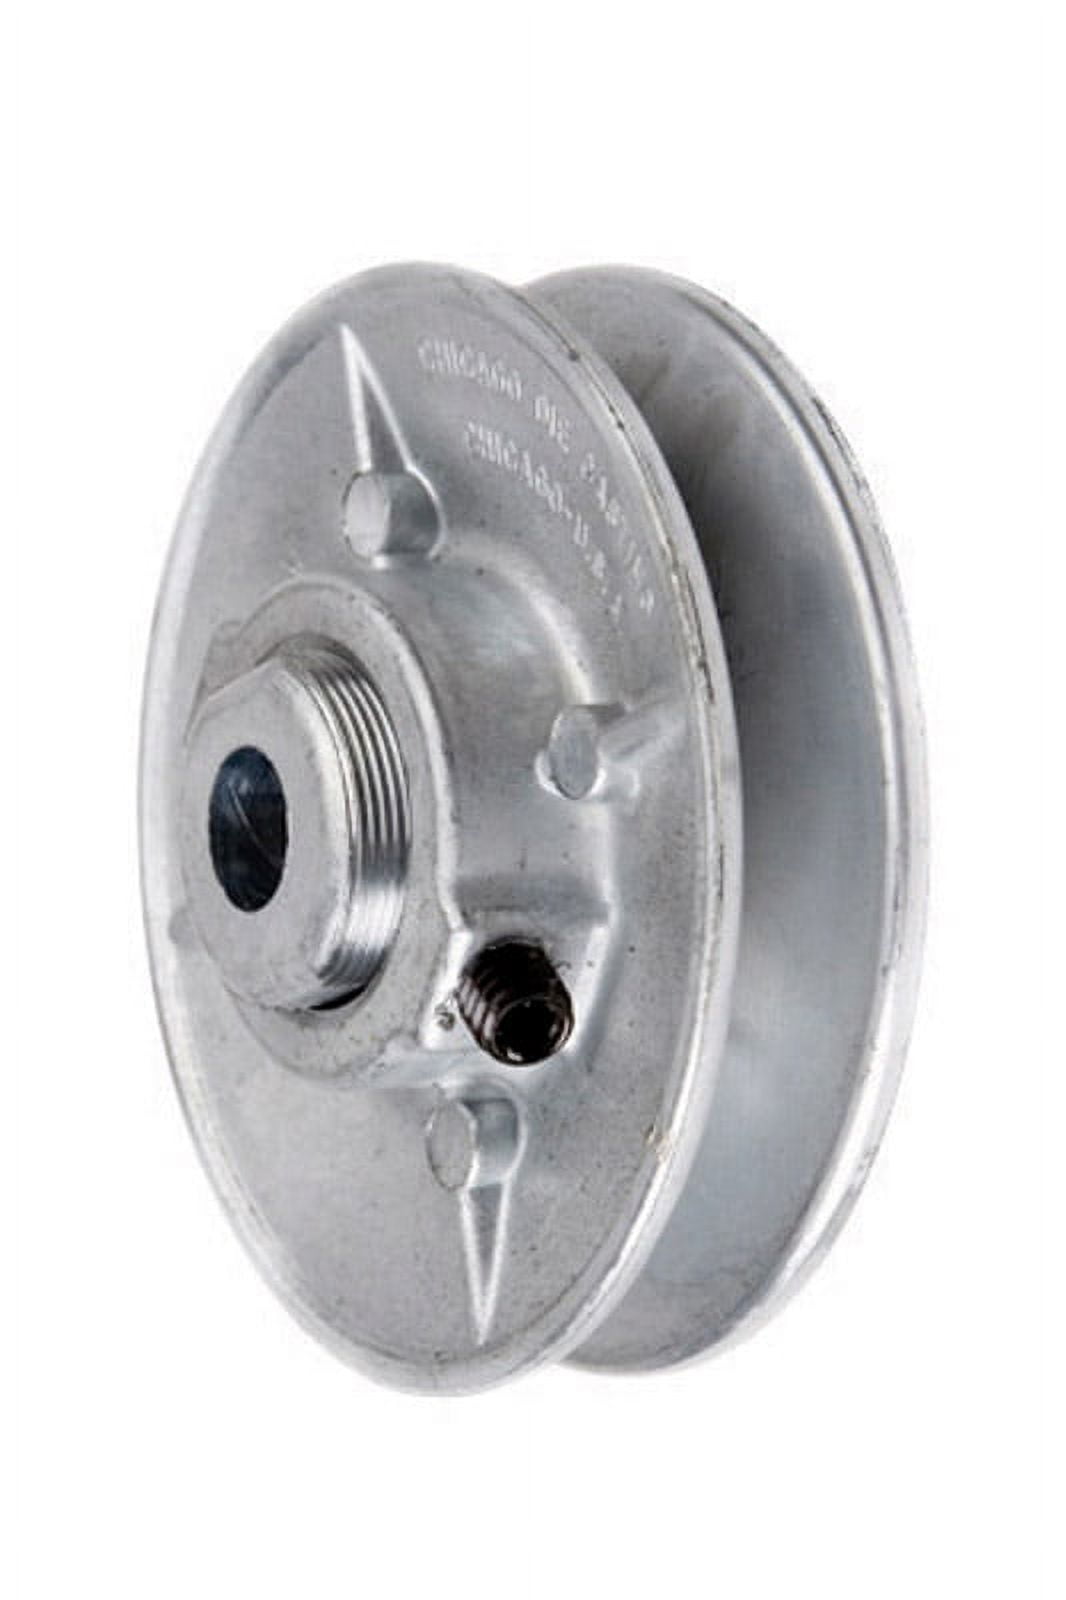 3.25 X 0.5 In. Bore Pulley